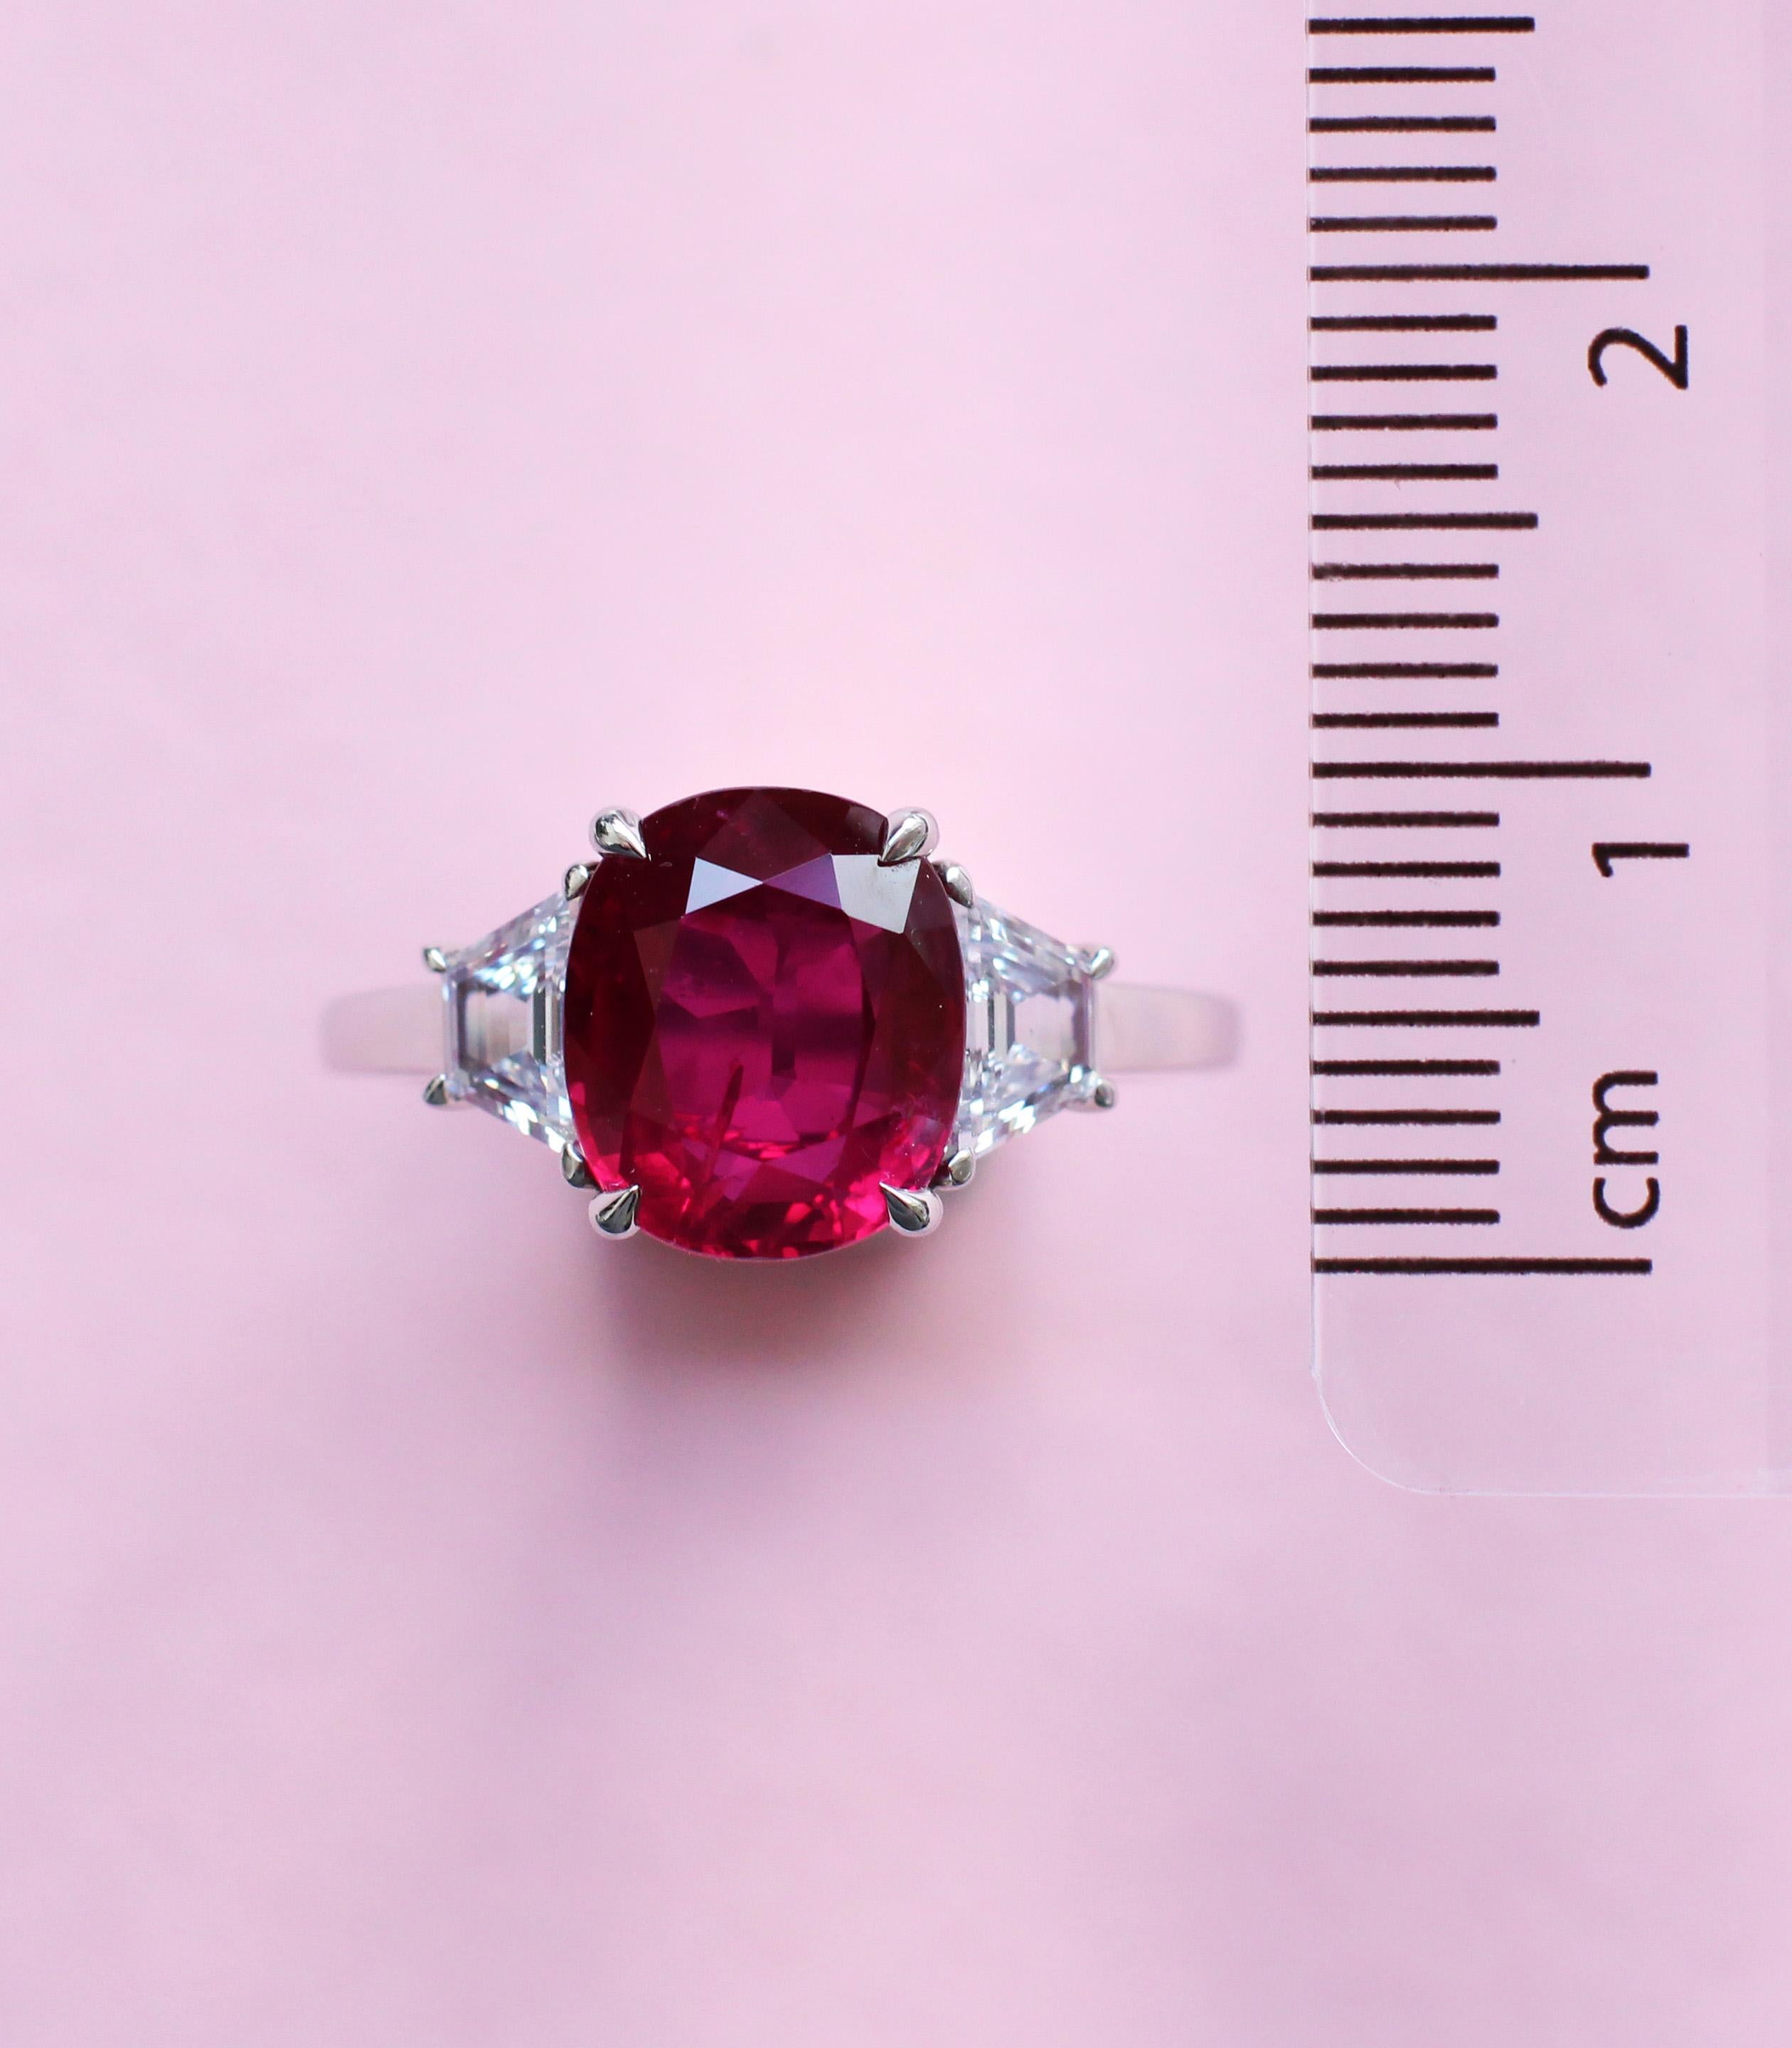 Cushion Cut 3.53 Carats Vivid Red Ruby Trilogy Ring with White Diamond Detail For Sale